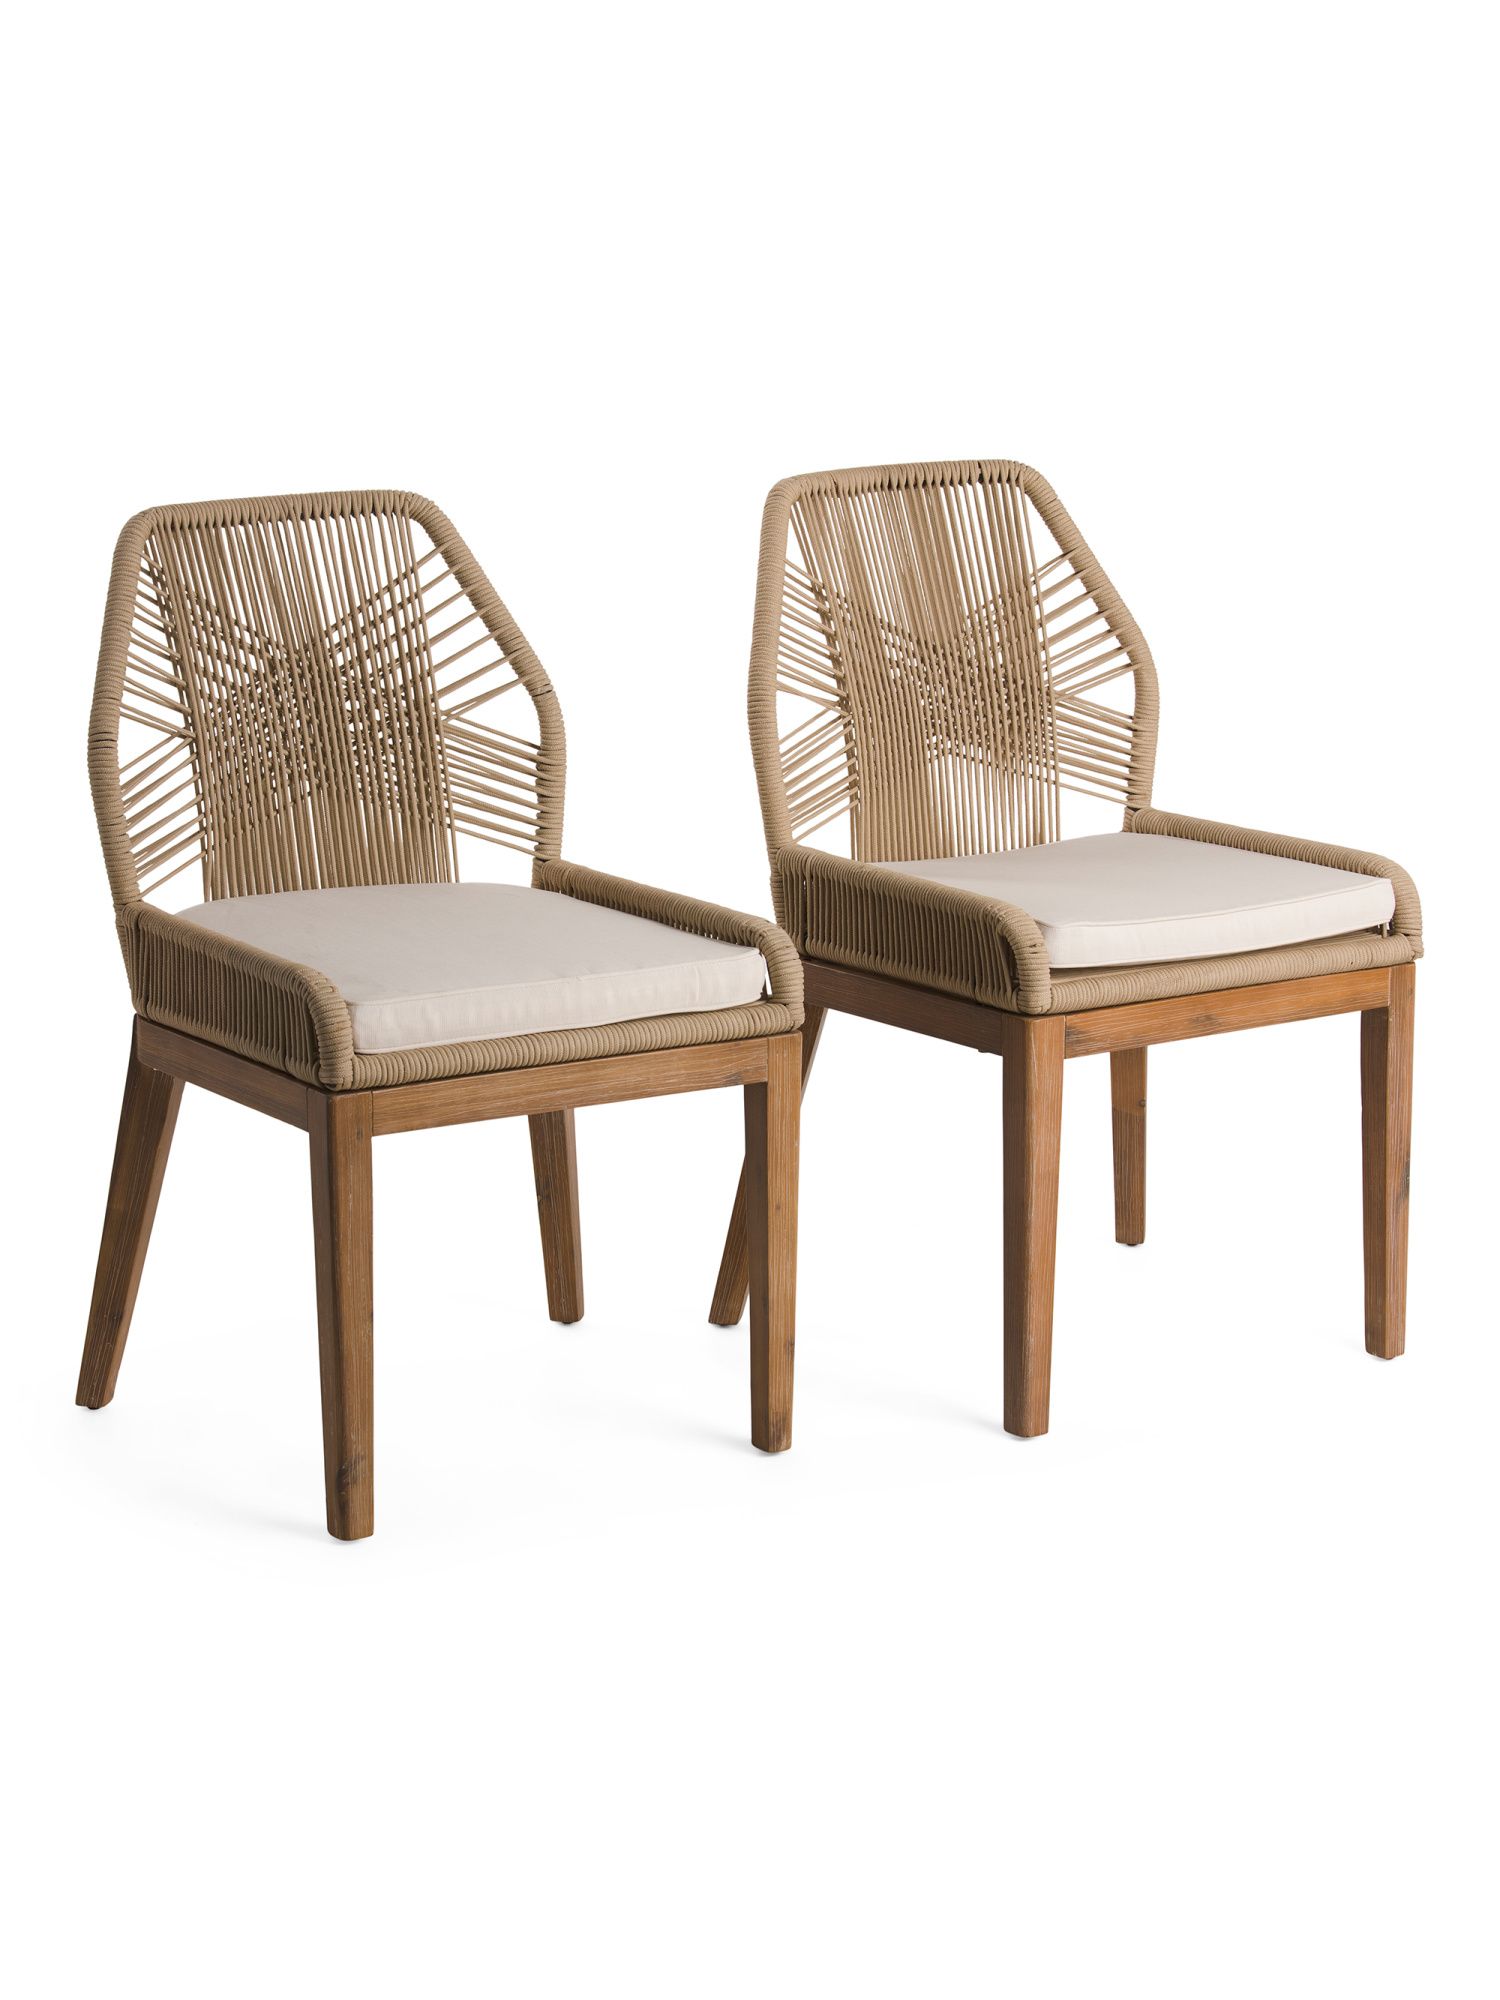 Set Of 2 Rope Crossweave Dining Chairs | TJ Maxx